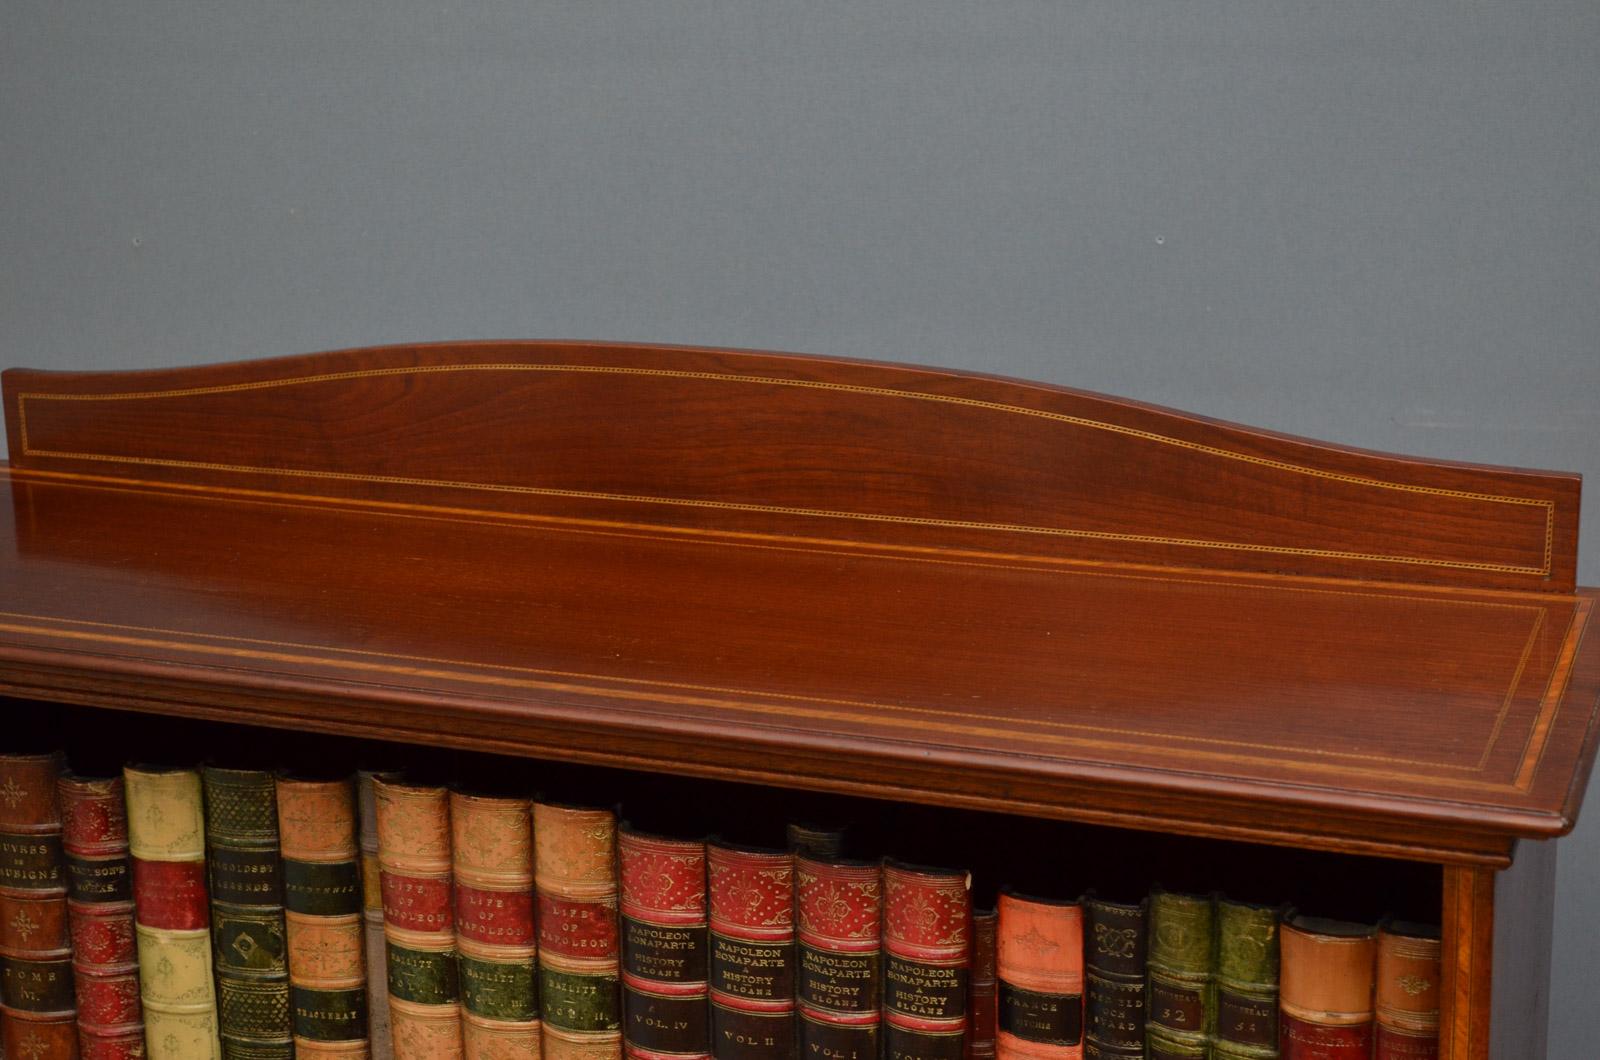 Sn4286, Edwardian mahogany open bookcase, having shaped and inlaid upstand above three shelves flanked by satinwood crossbanded pilasters, all standing on bracket feet. This antique bookcase has been sympathetically restored, circa 1900

Measures: